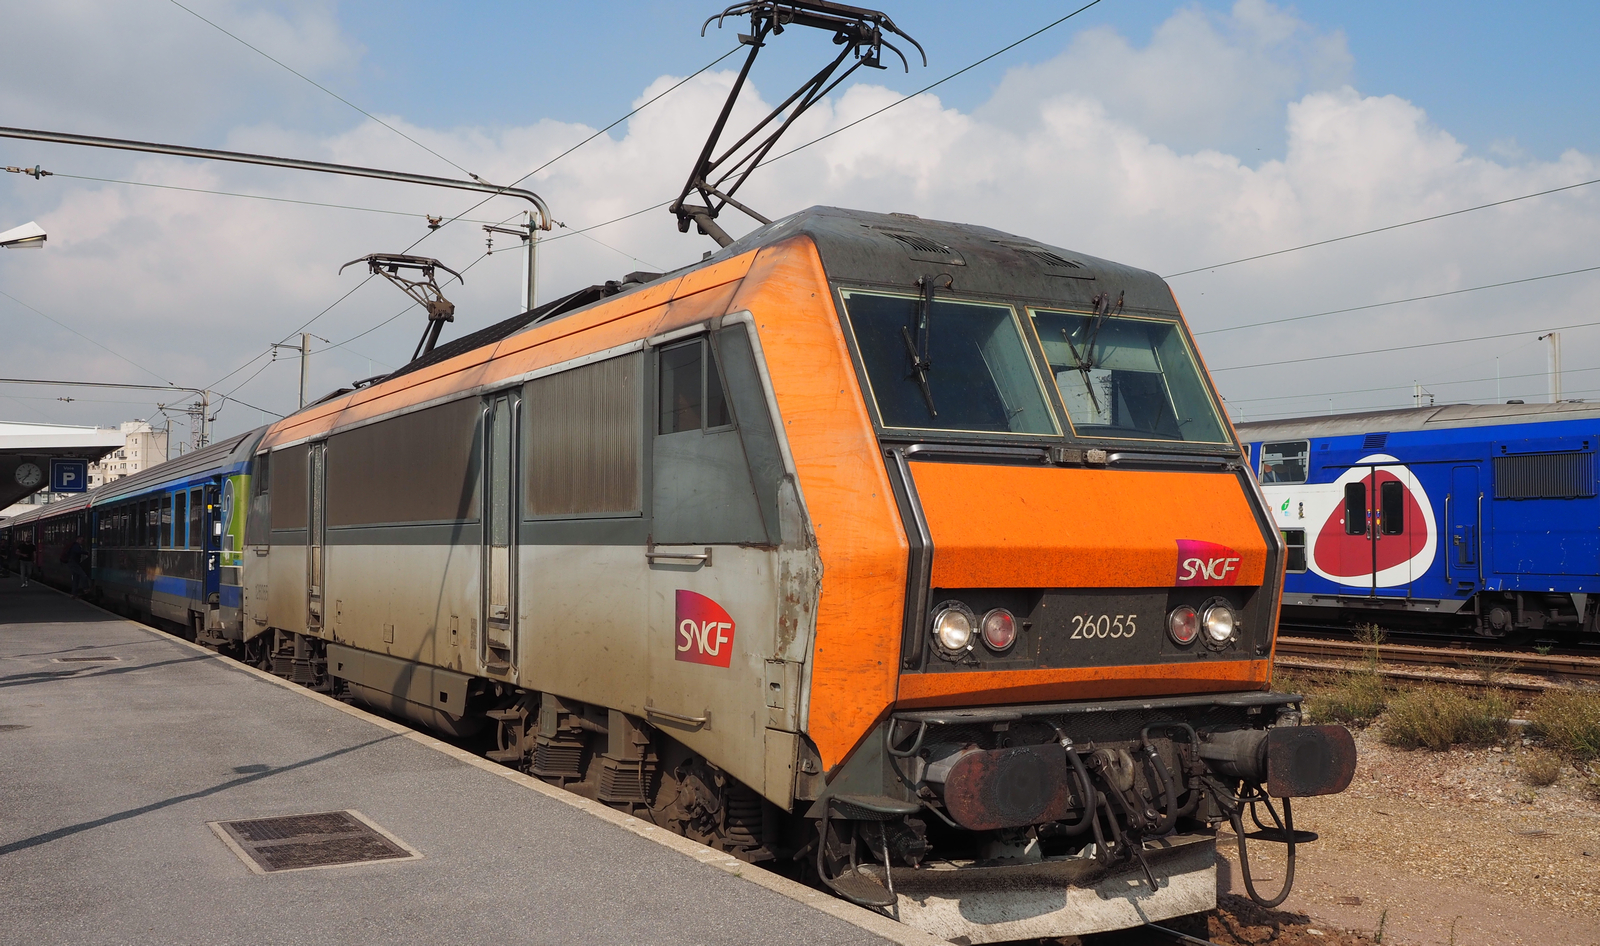 BB 26055 in September 2014 at Paris-Bercy